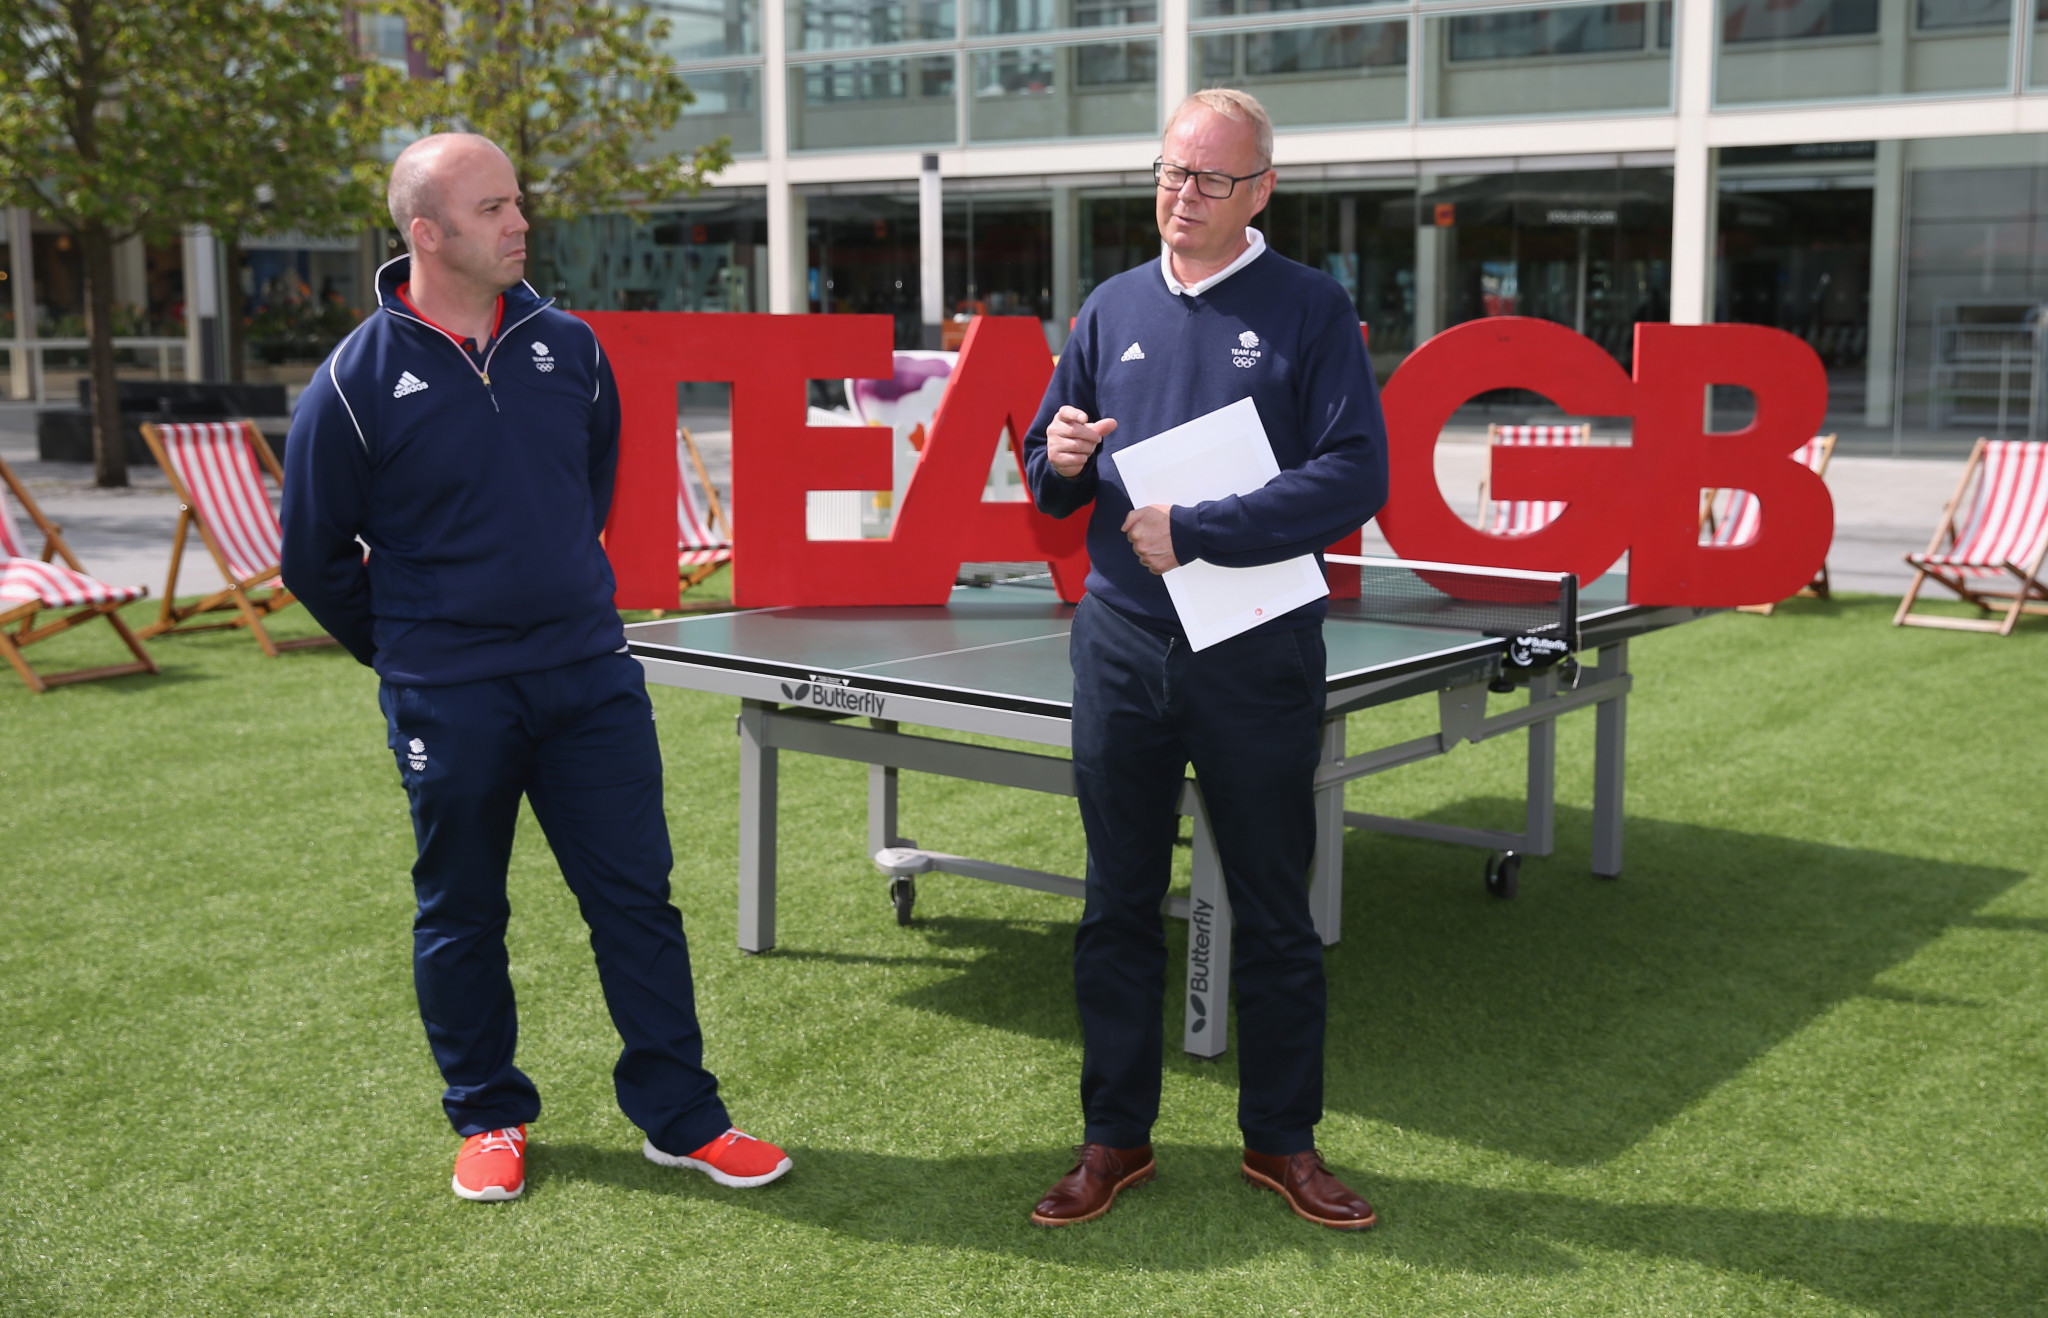 Mark England was Team GB's Chef de Mission for the 2016 Olympic Games in Rio de Janeiro and will fulfill the same role at Tokyo 2020 before turning his attention to Birmingham 2022 ©Getty Images